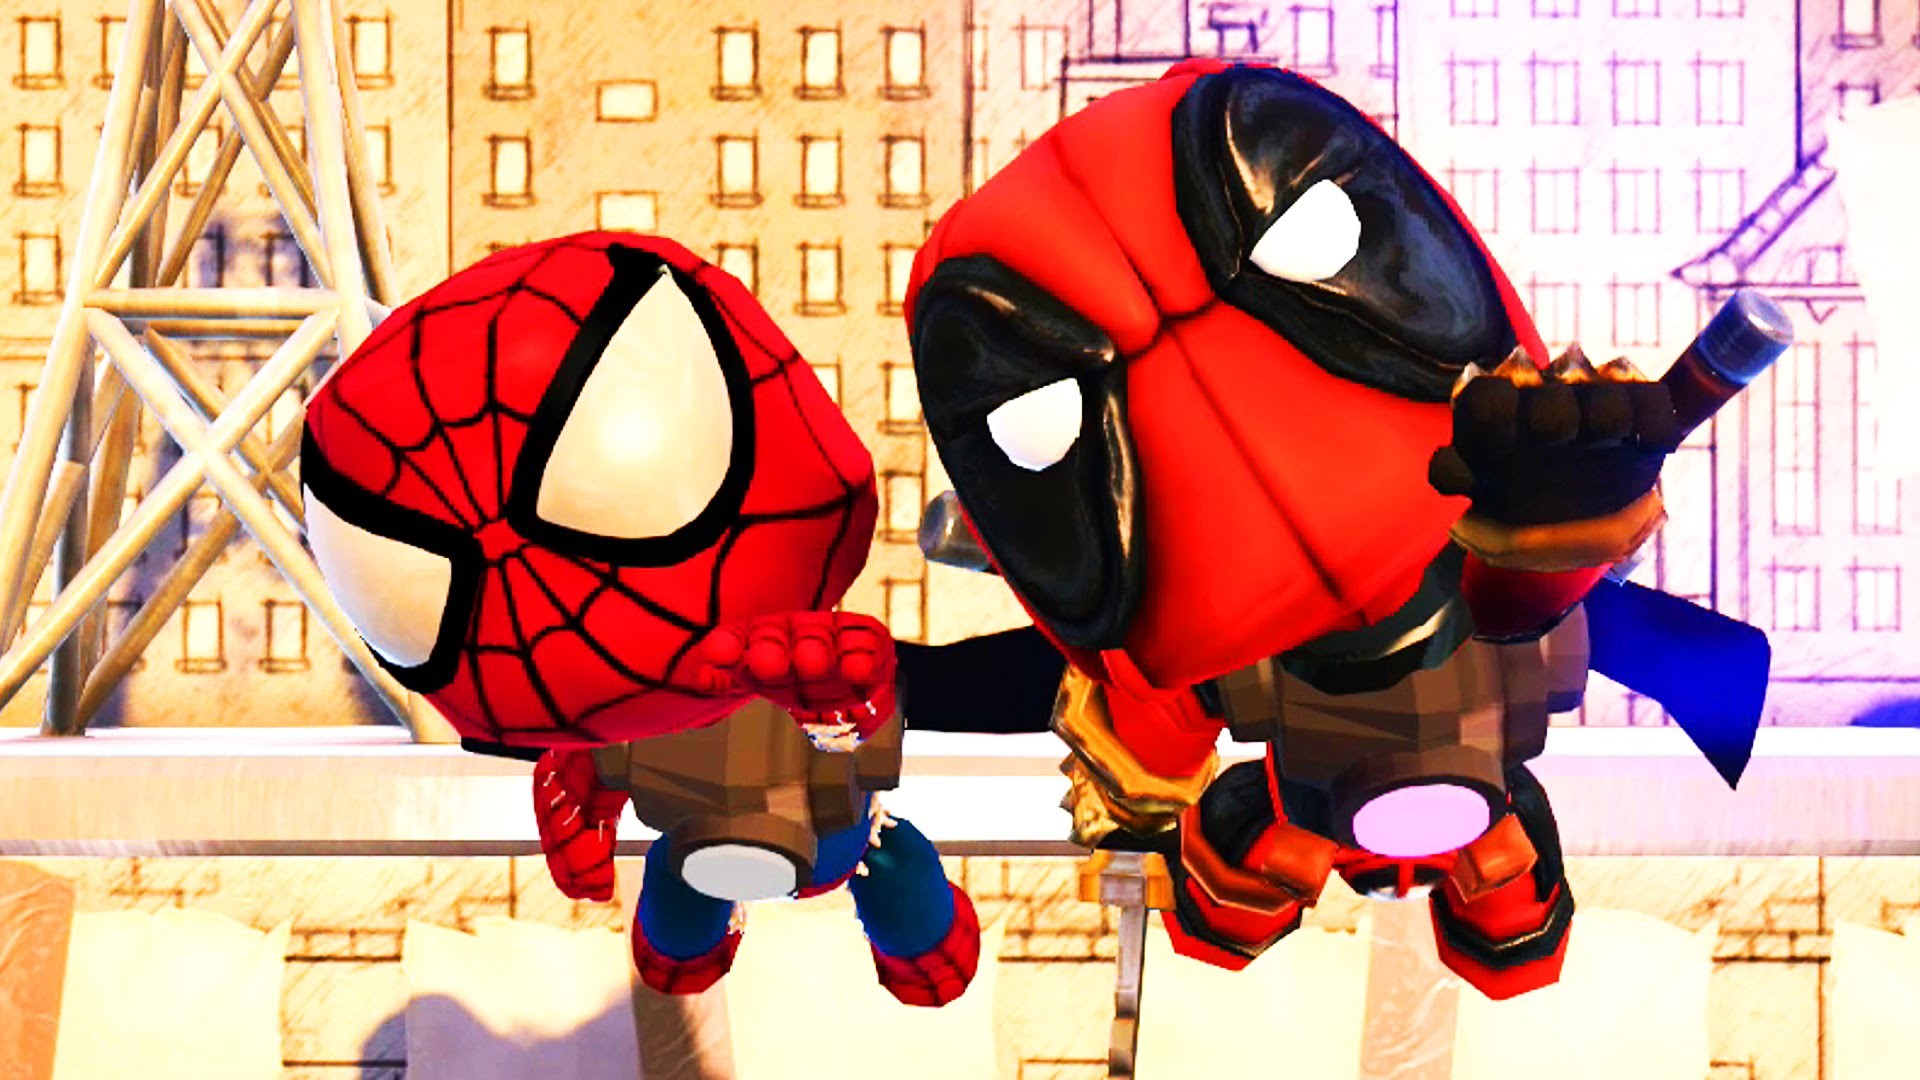 1920x1080 LittleBigPlanet 3 - The Picture Walls with Spiderman and Deadpool -  Superhero Fun! - YouTube